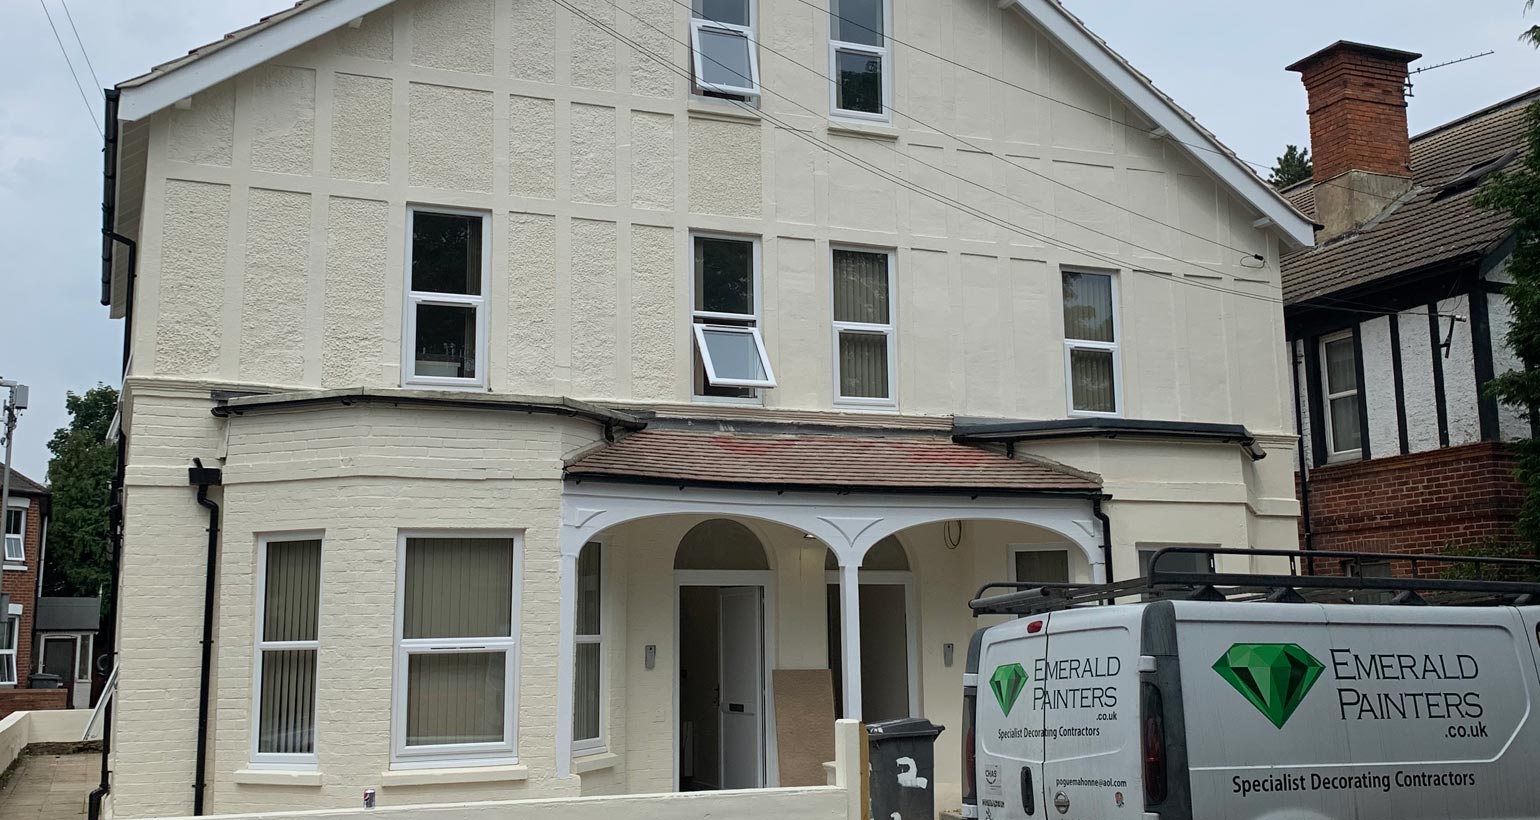 Painting Project - Exterior and Interior in HMO House of Multiple Occupancy Painted by Emerald Painters Bournemouth